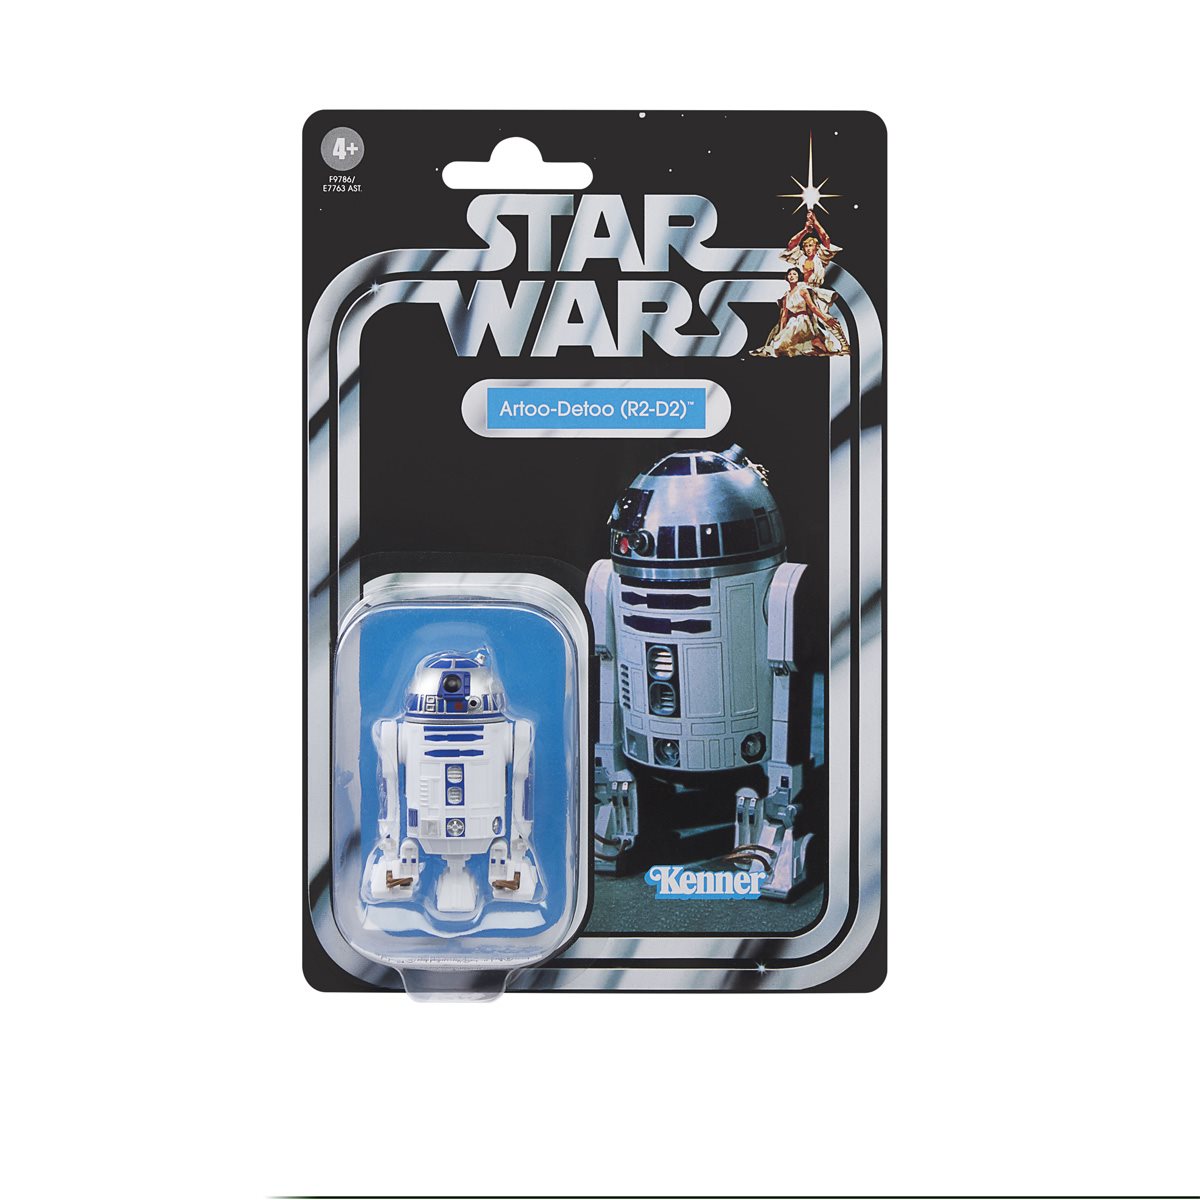 Star Wars The Vintage Collection 3 34-Inch Artoo-Detoo (R2-D2) Action Figure HSF9786 5010996218650